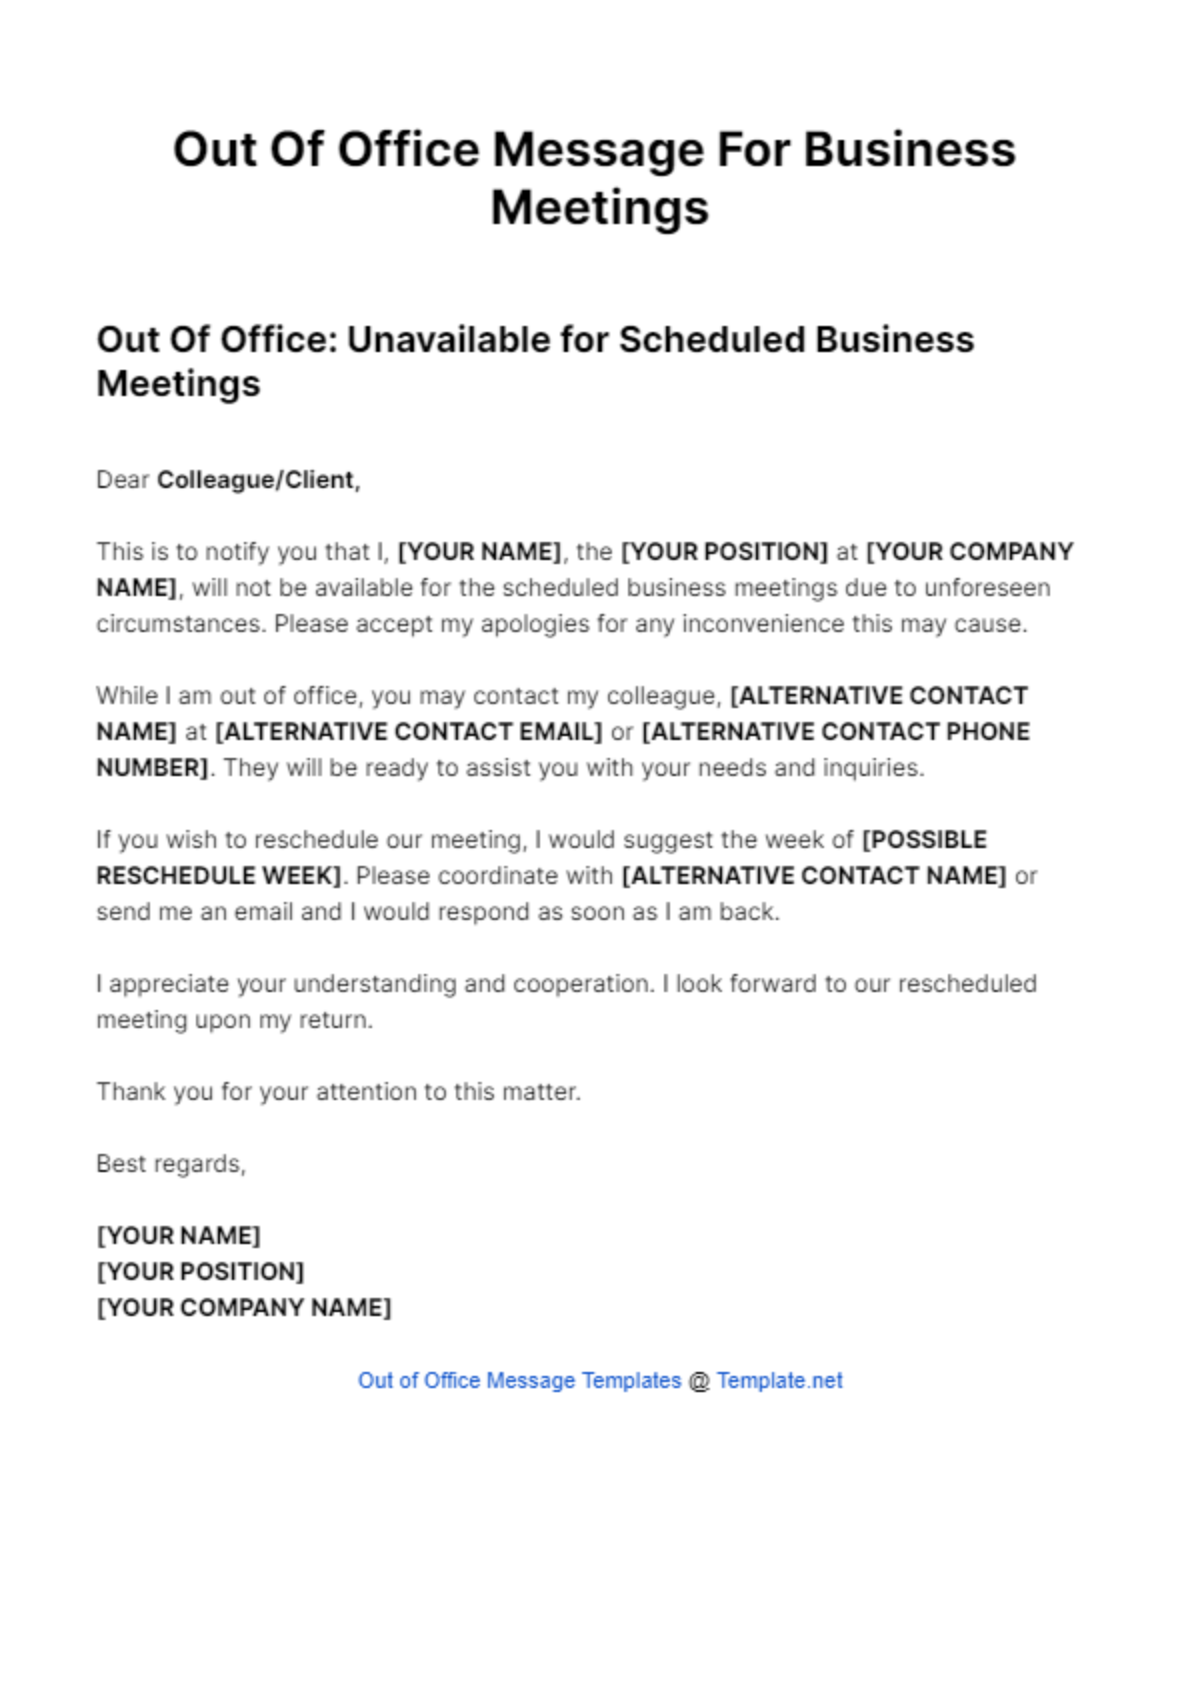 Out Of Office Message For Business Meetings Template